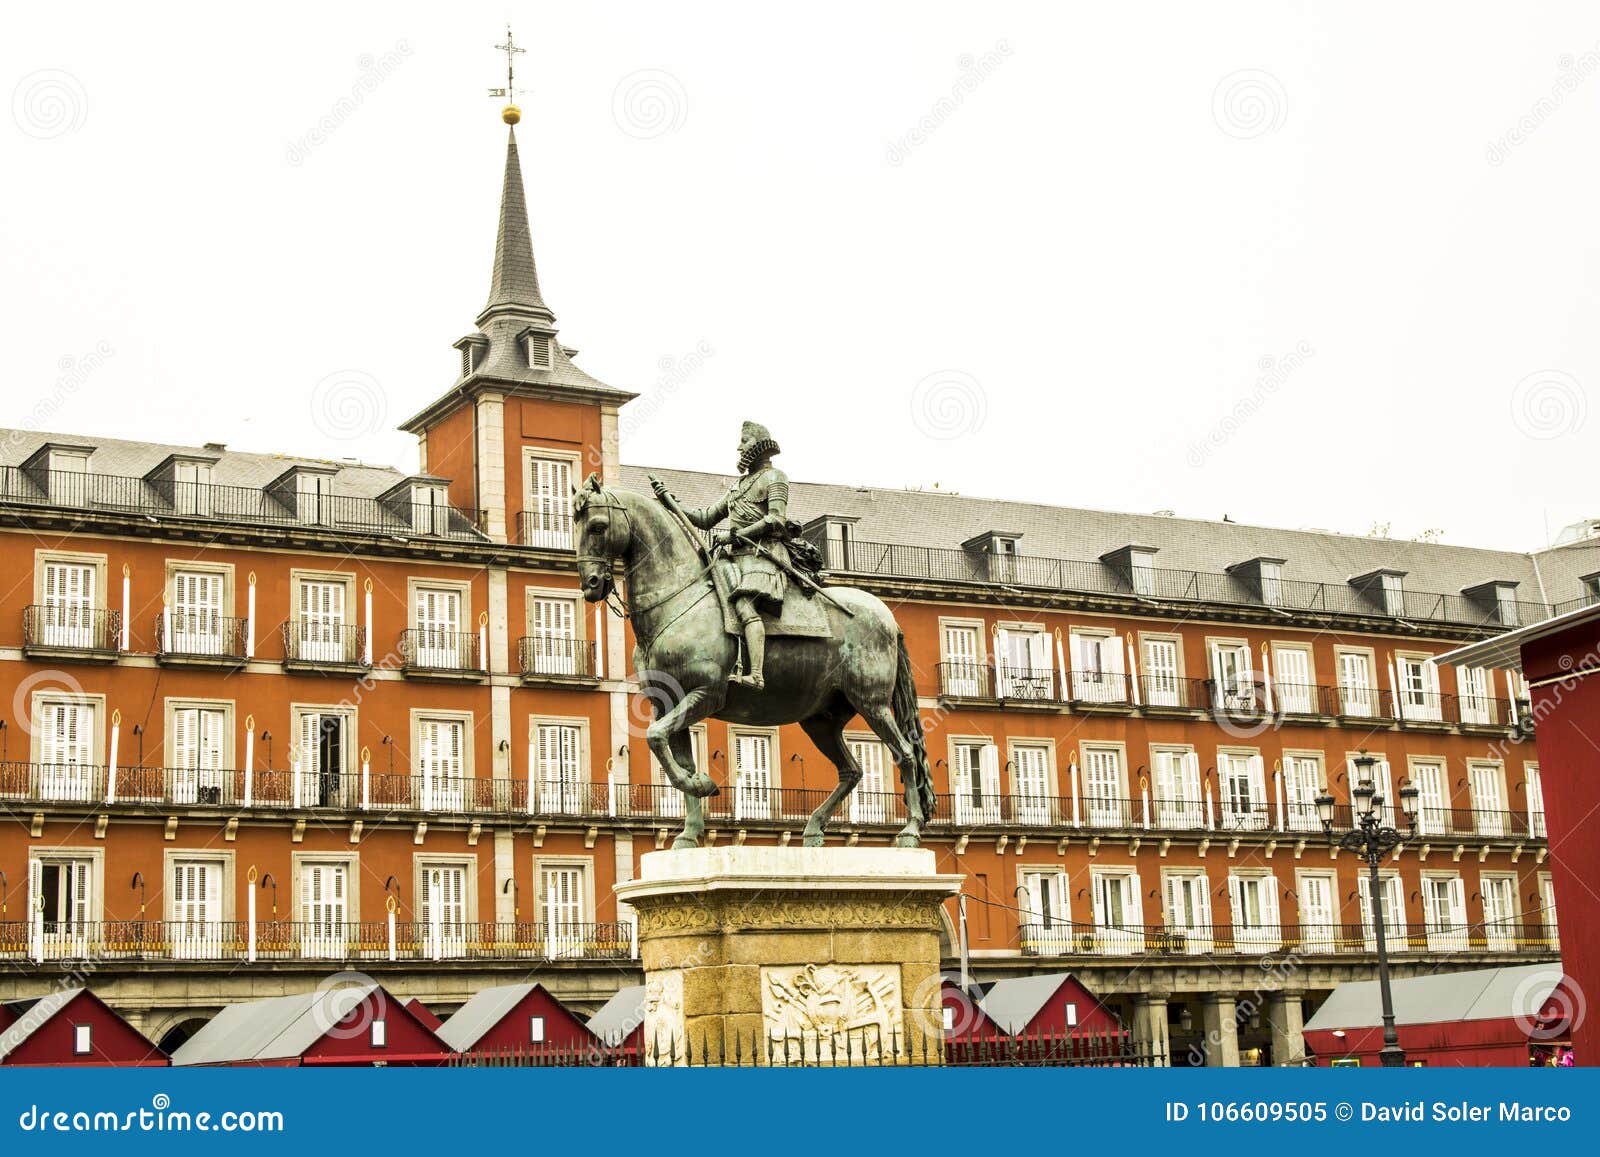 equestrian statue of felipe iii house of the bakery in the background in . madrid